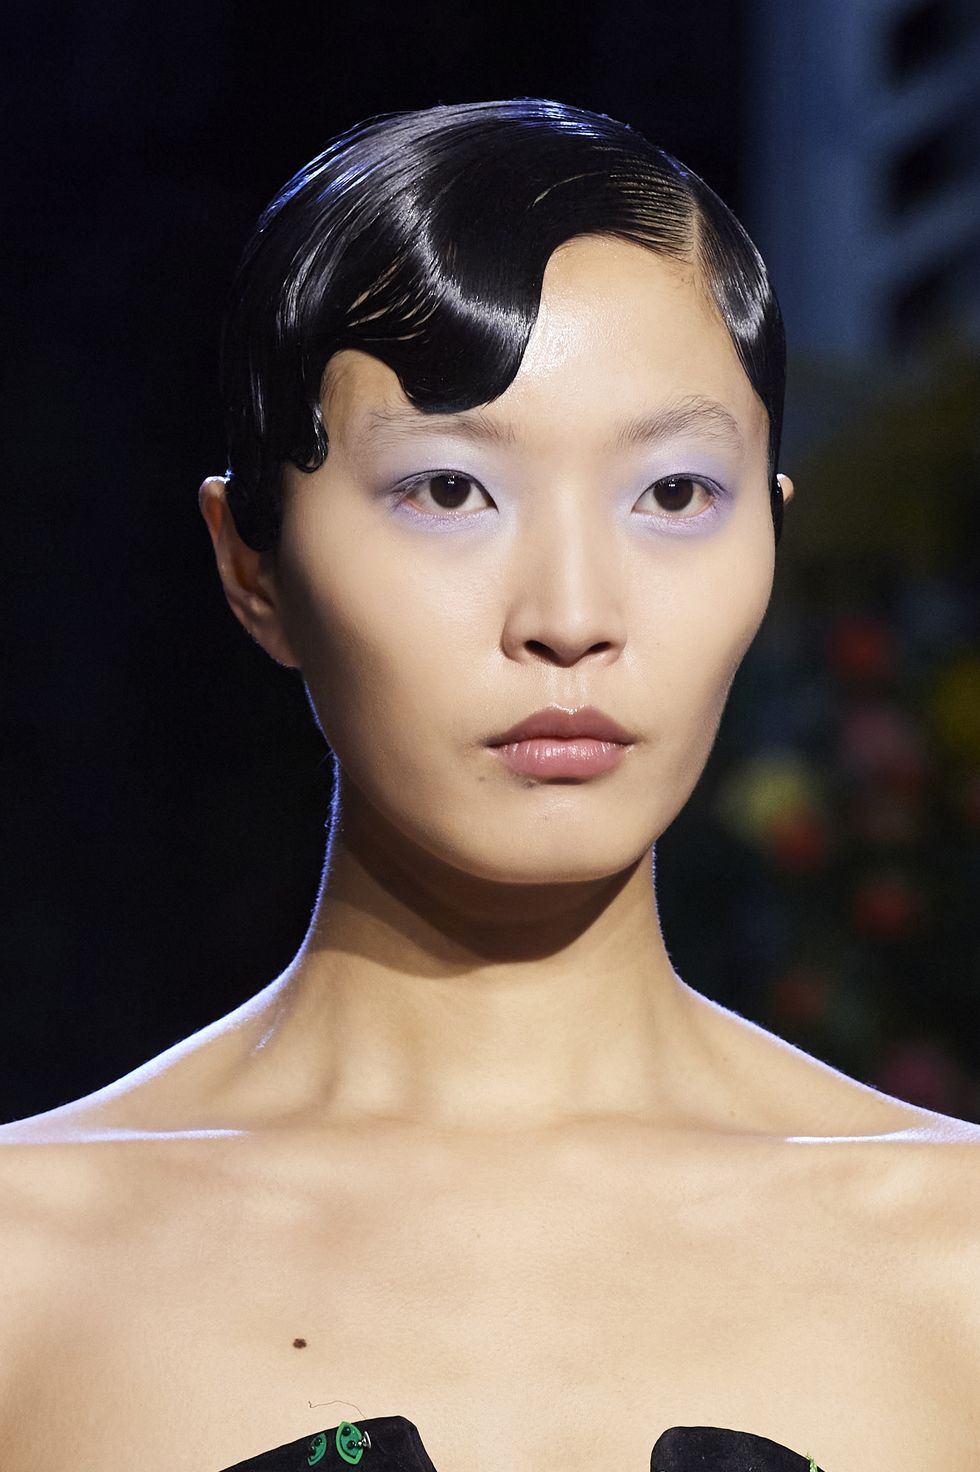 Louis Vuitton's One-Eyed Go Faster Stripes Just Cut Your Make-Up